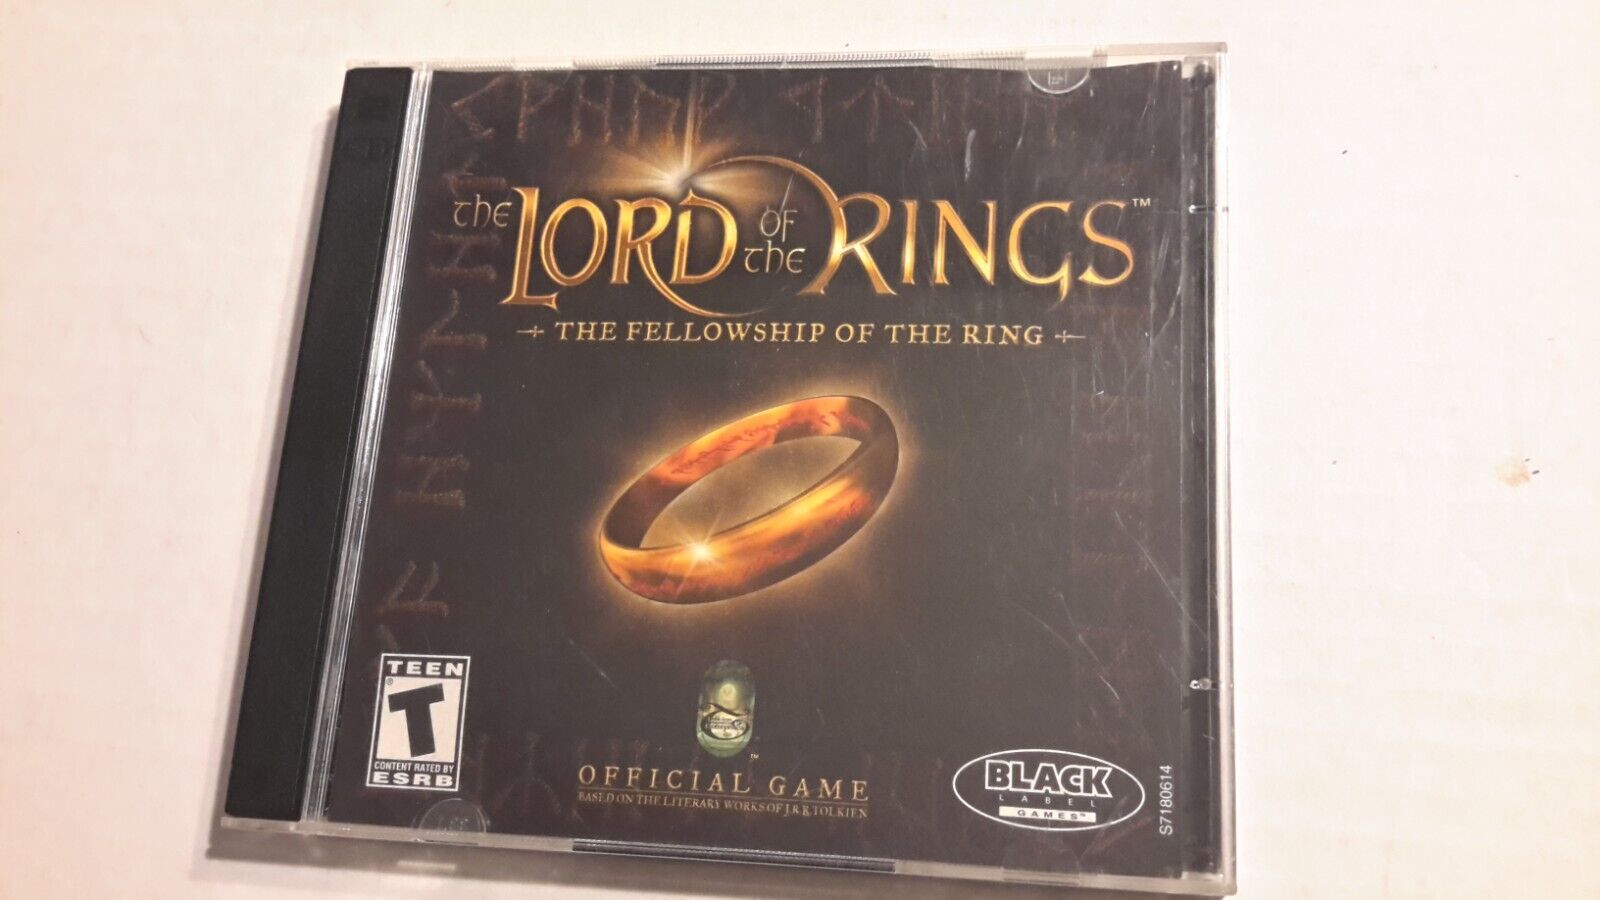 The Lord of the Rings The Fellowship of the Ring PC CD earth hobbit puzzles game